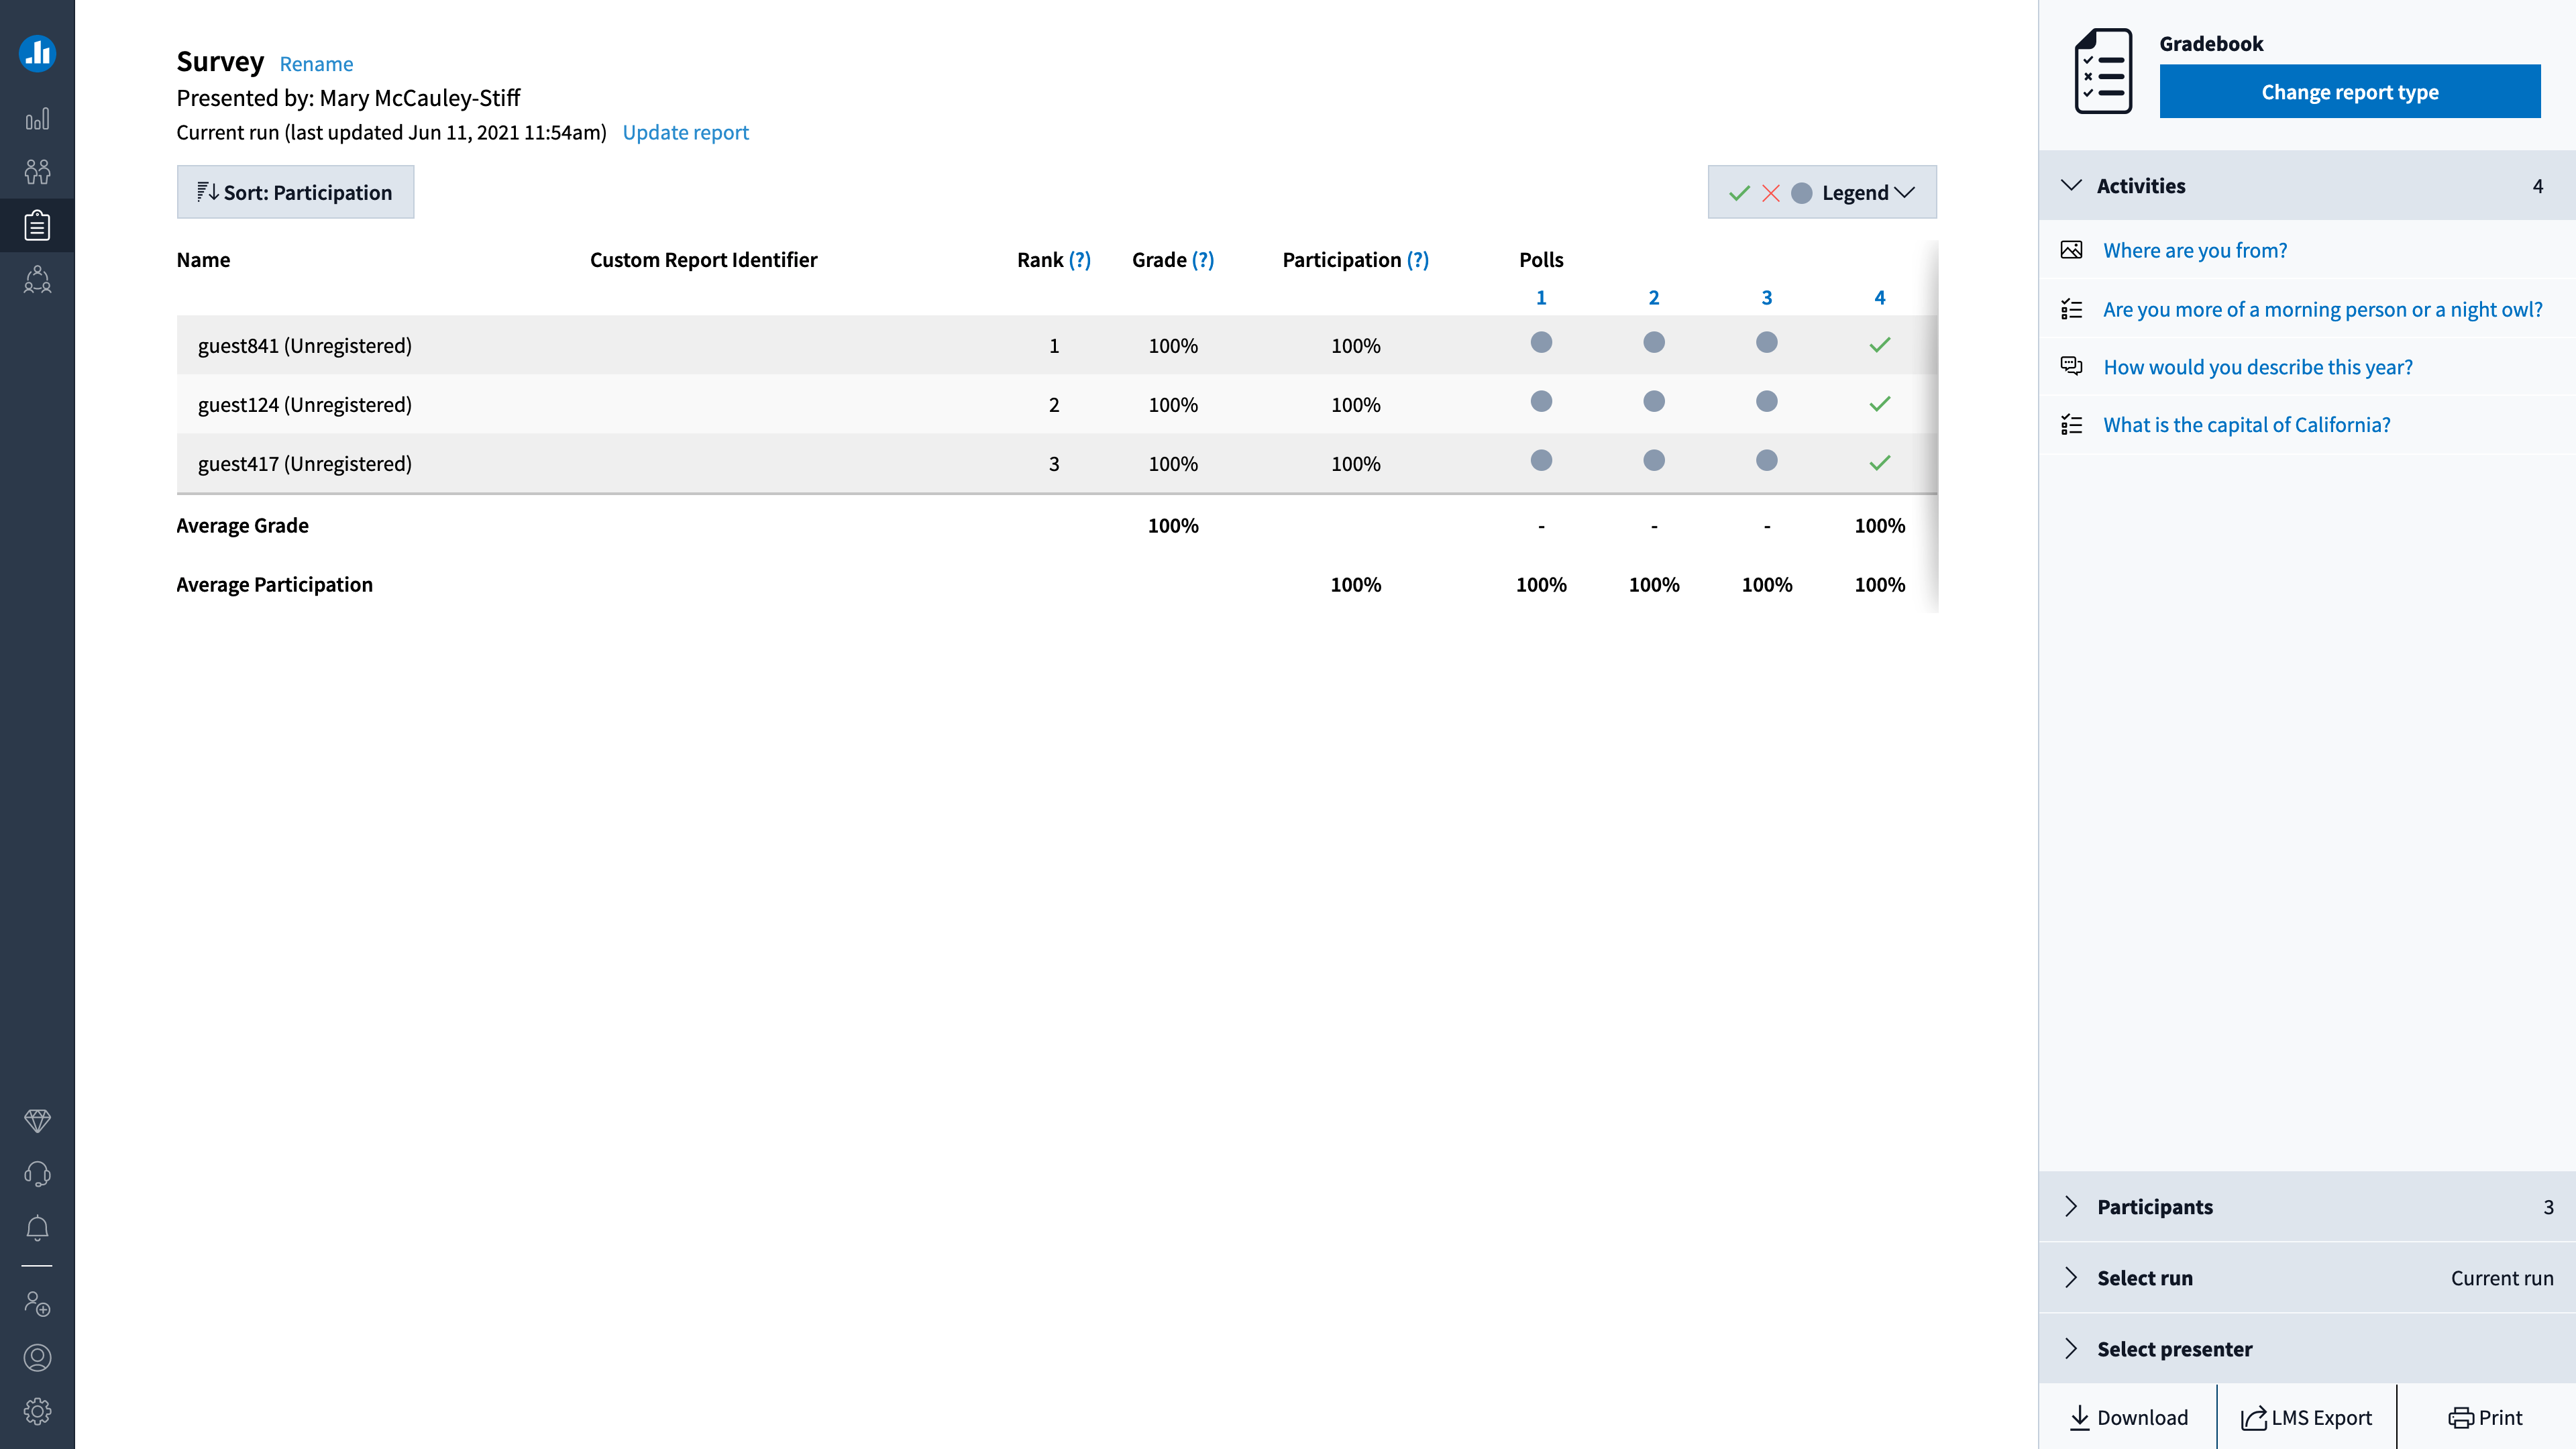 An image of the Gradebook report generated using Poll Everywhere.